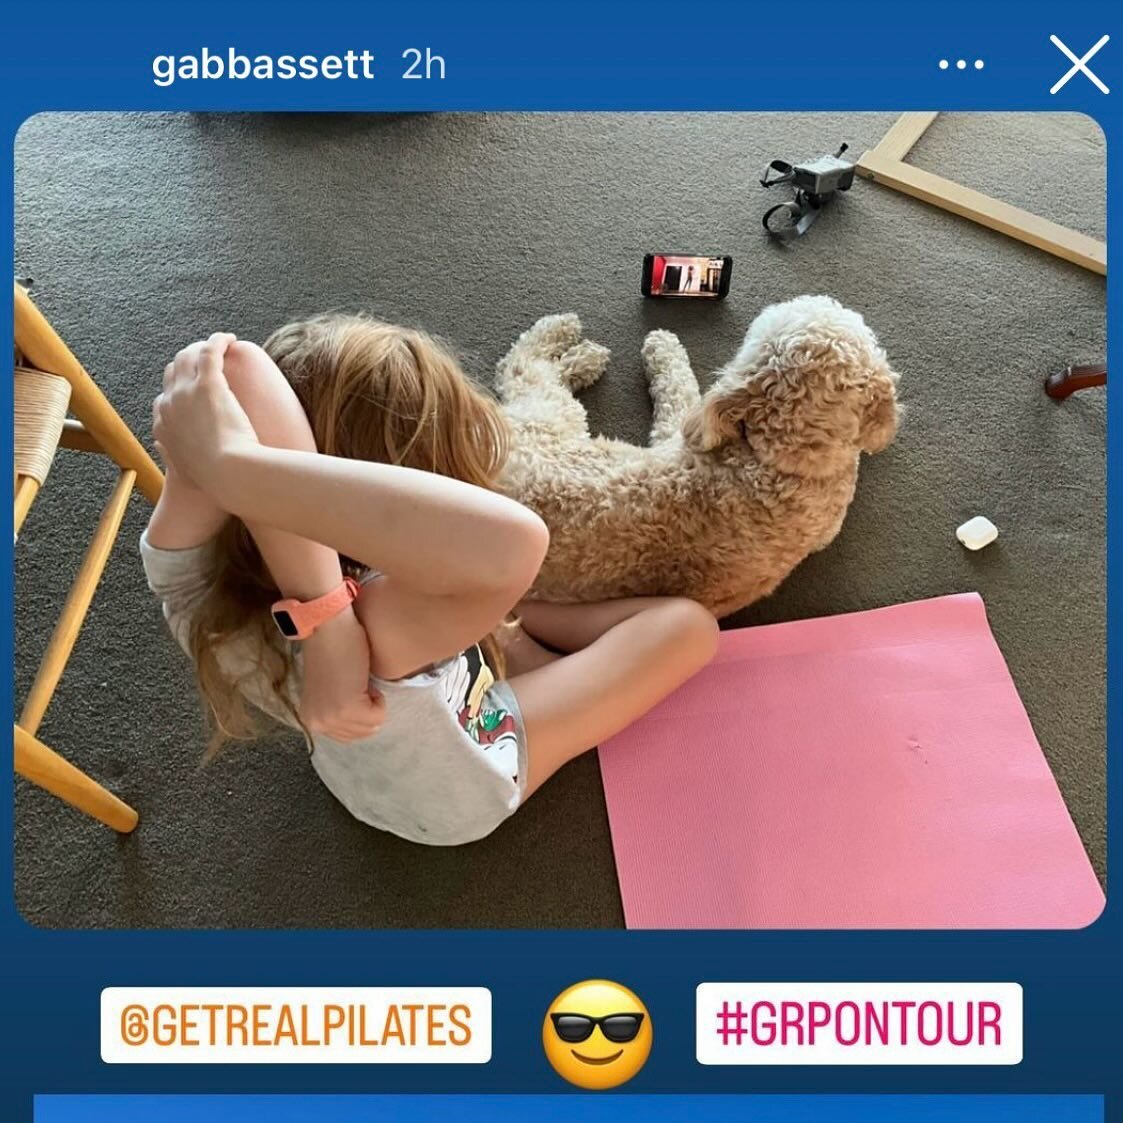 Want to earn weeks of free online Pilates? Then my holiday promo is for you.

Do a class from my library of 80 videos, post on Insty, tag @getrealpilates &amp; #grpontour &amp; I&rsquo;ll thank you with a week of free classes.

If you&rsquo;re new to